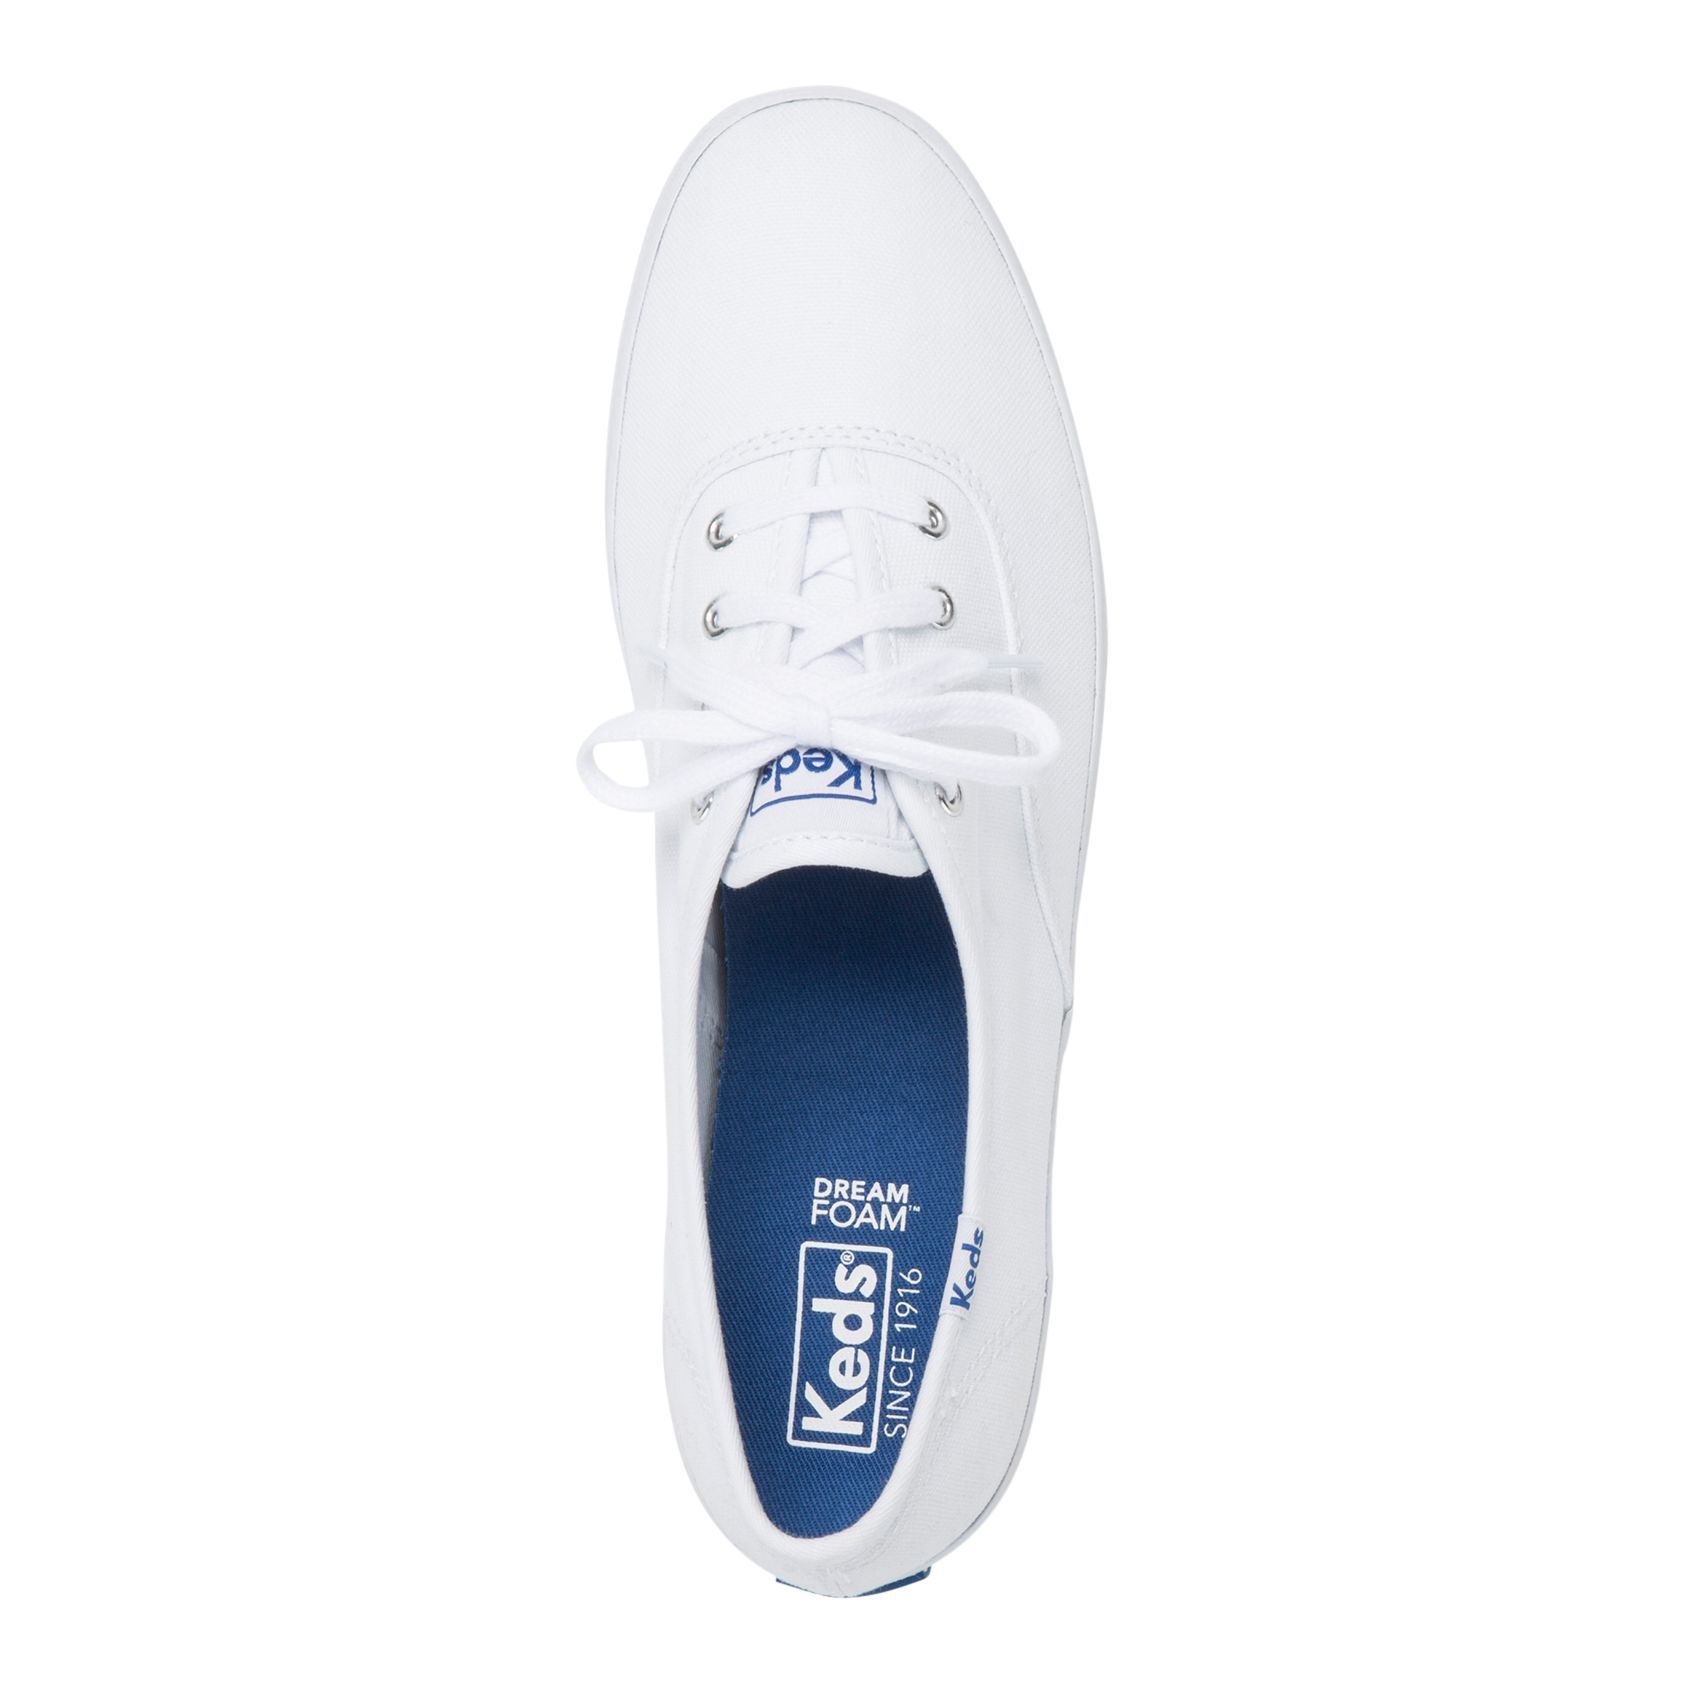 Keds Women's Champion Shoes, Sneakers, Casual